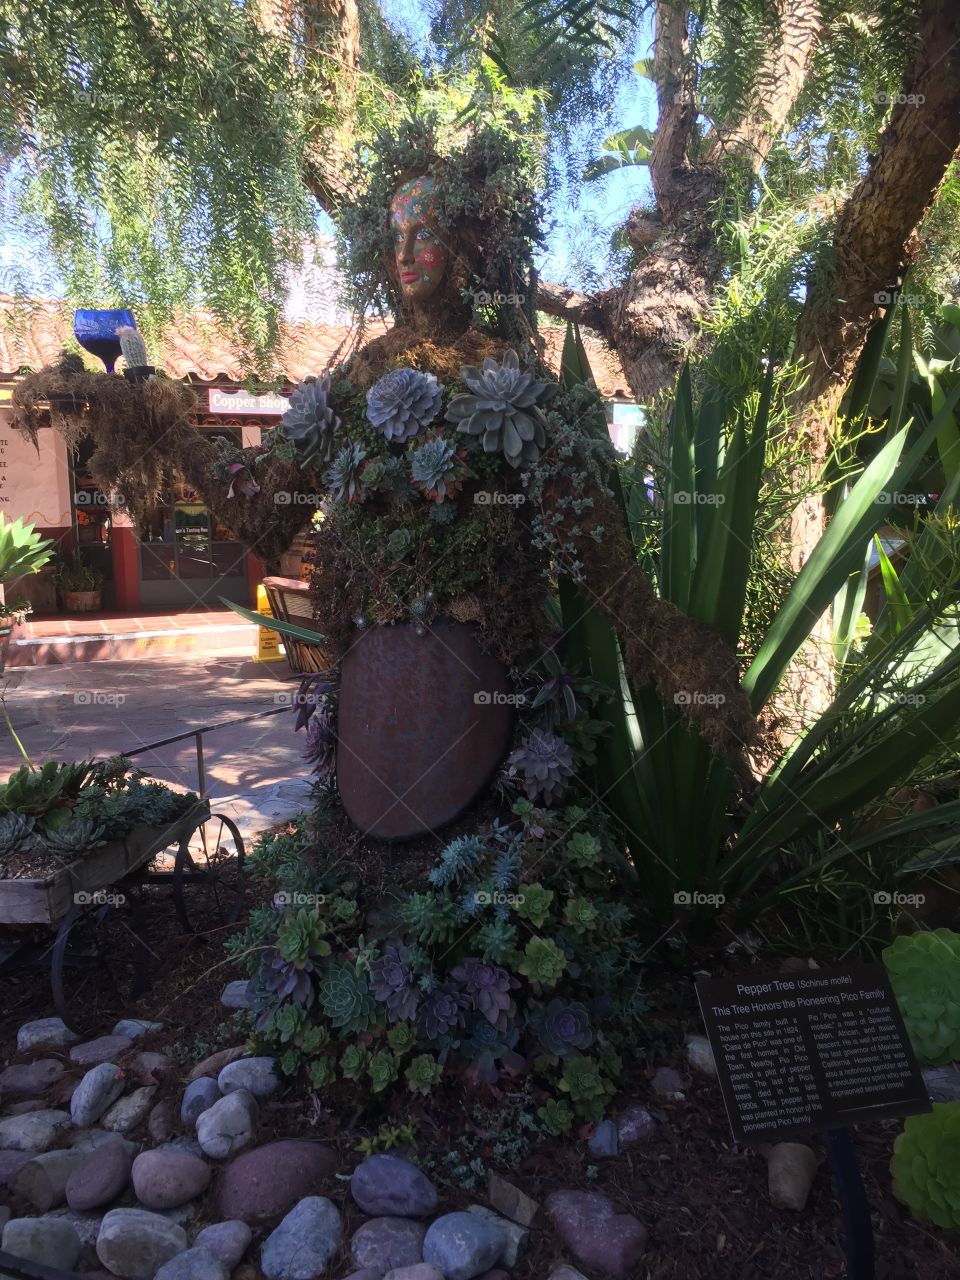 A rusting metal statue of a woman surrounded by plants stands next to a Pepper tree to honor  the Pico pioneer family who were some of the first to migrate to Old Town.